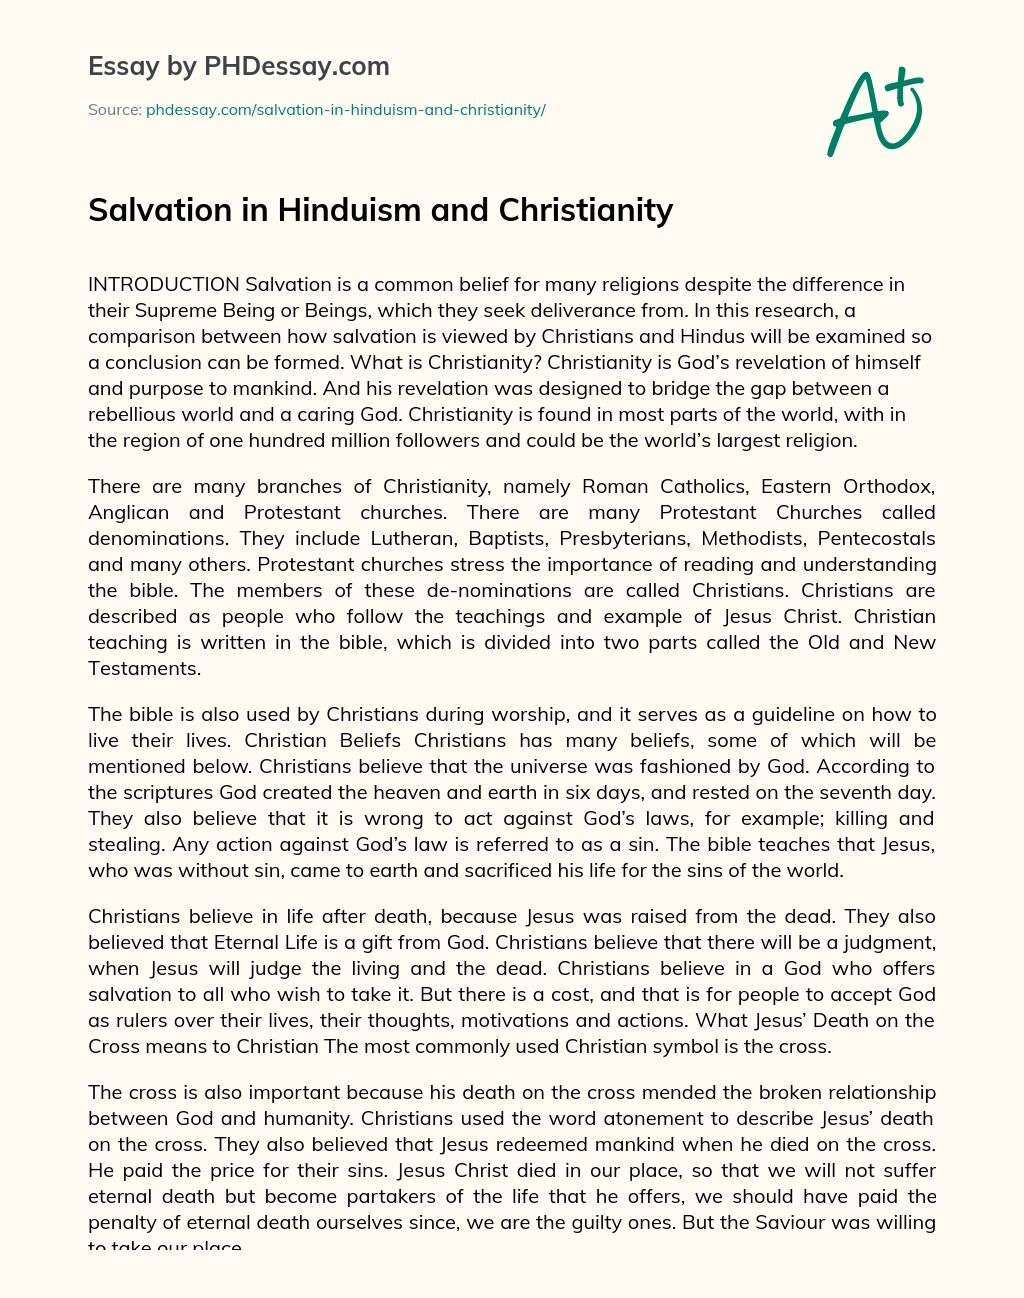 Salvation in Hinduism and Christianity essay